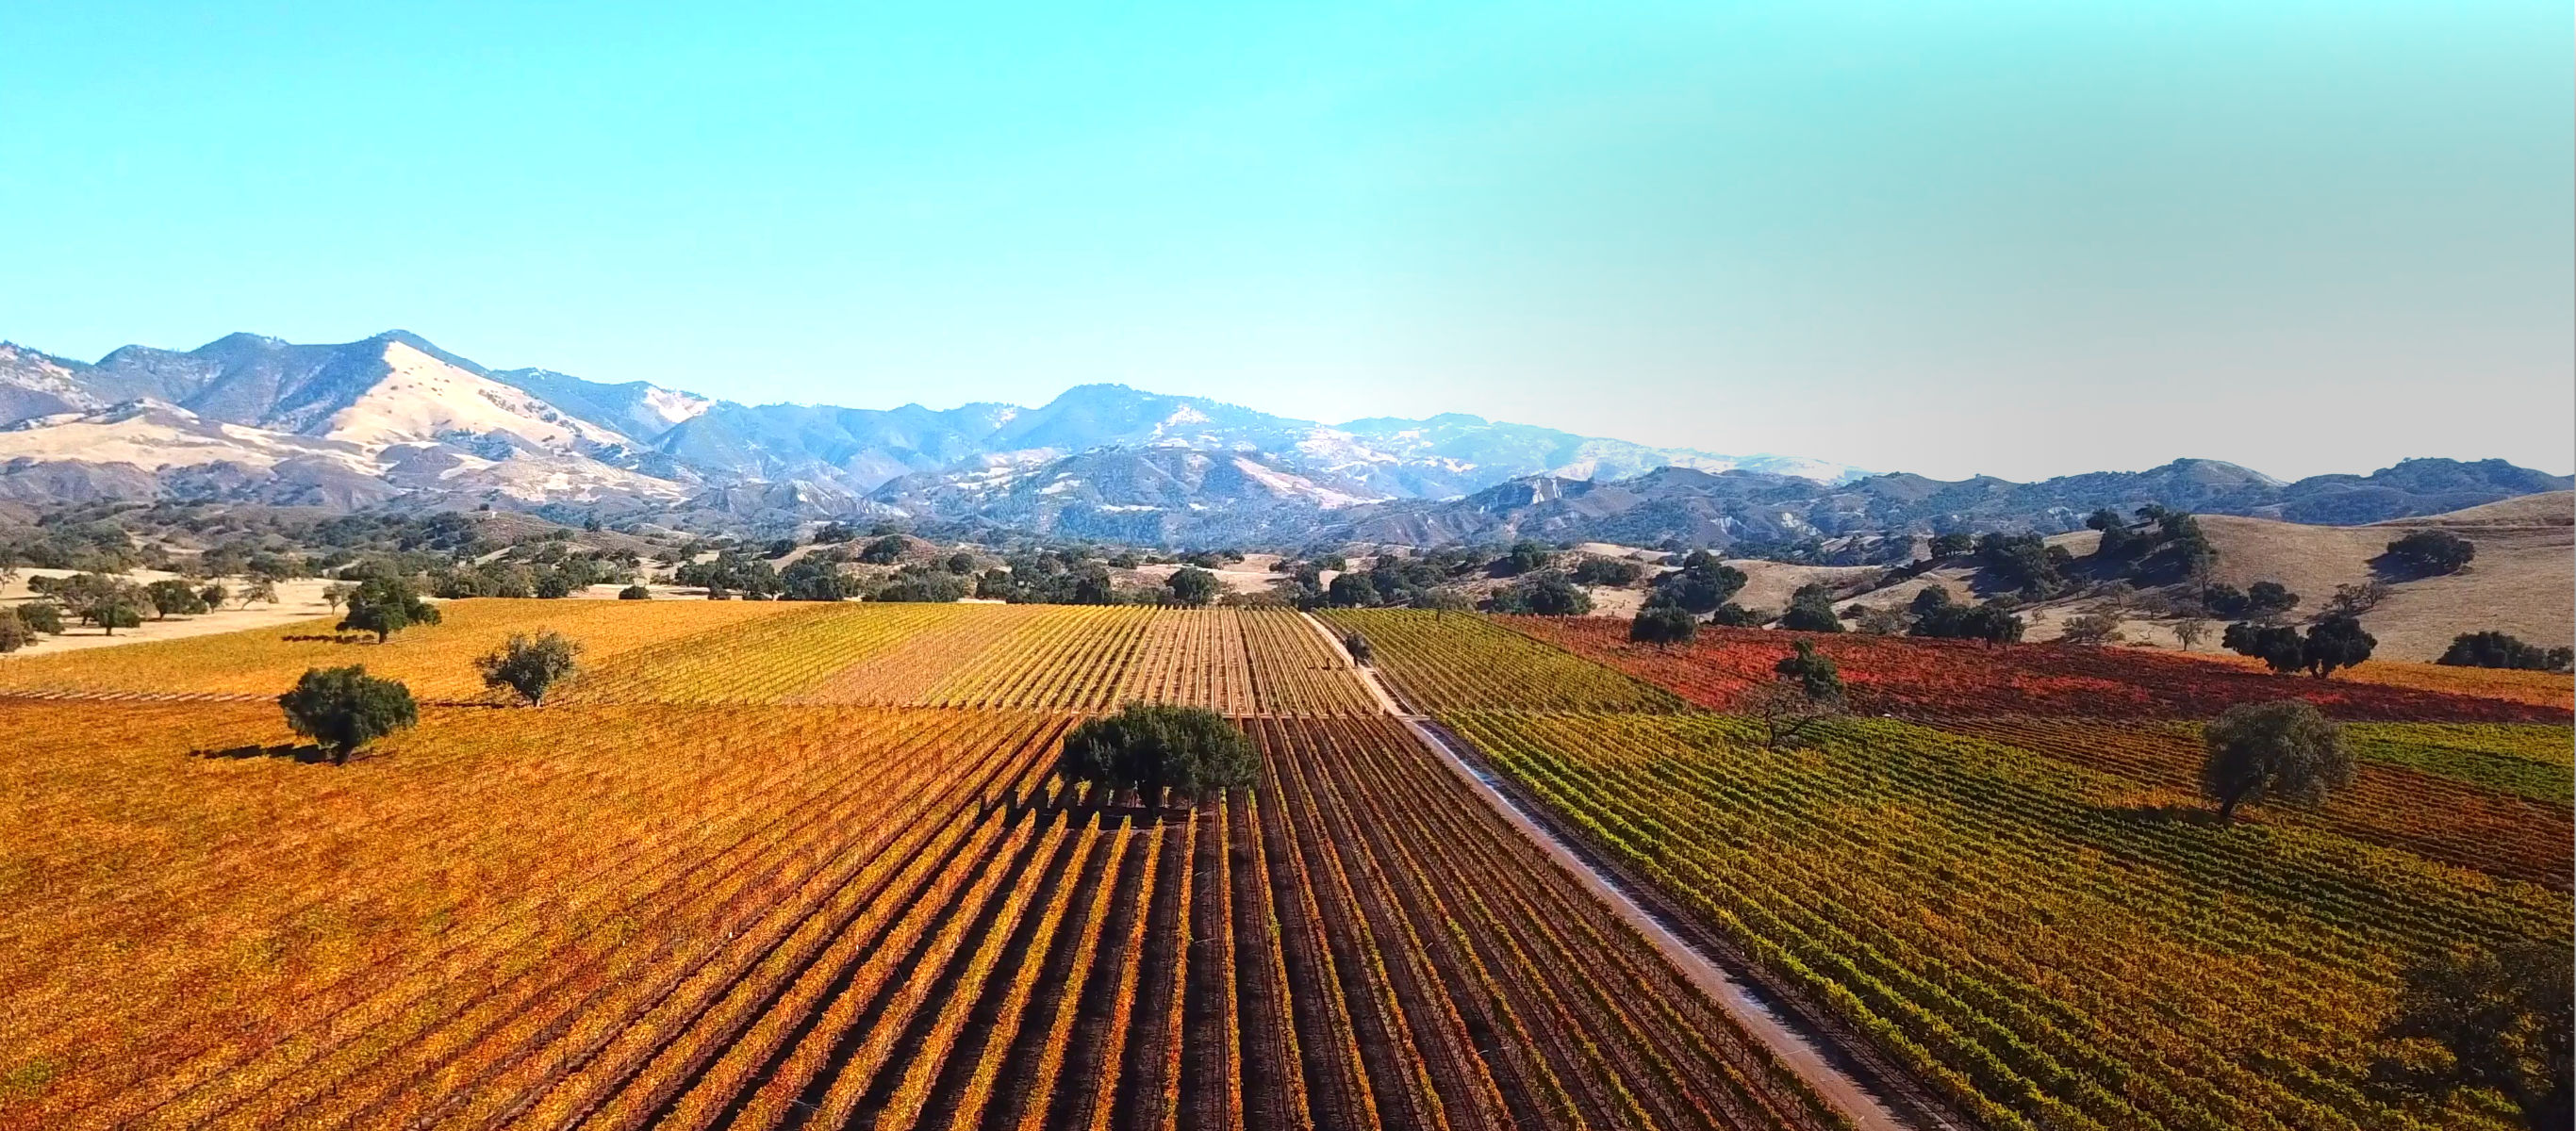 Aerial view of Rodney's Vineyard, located at the Fess Parker home ranch